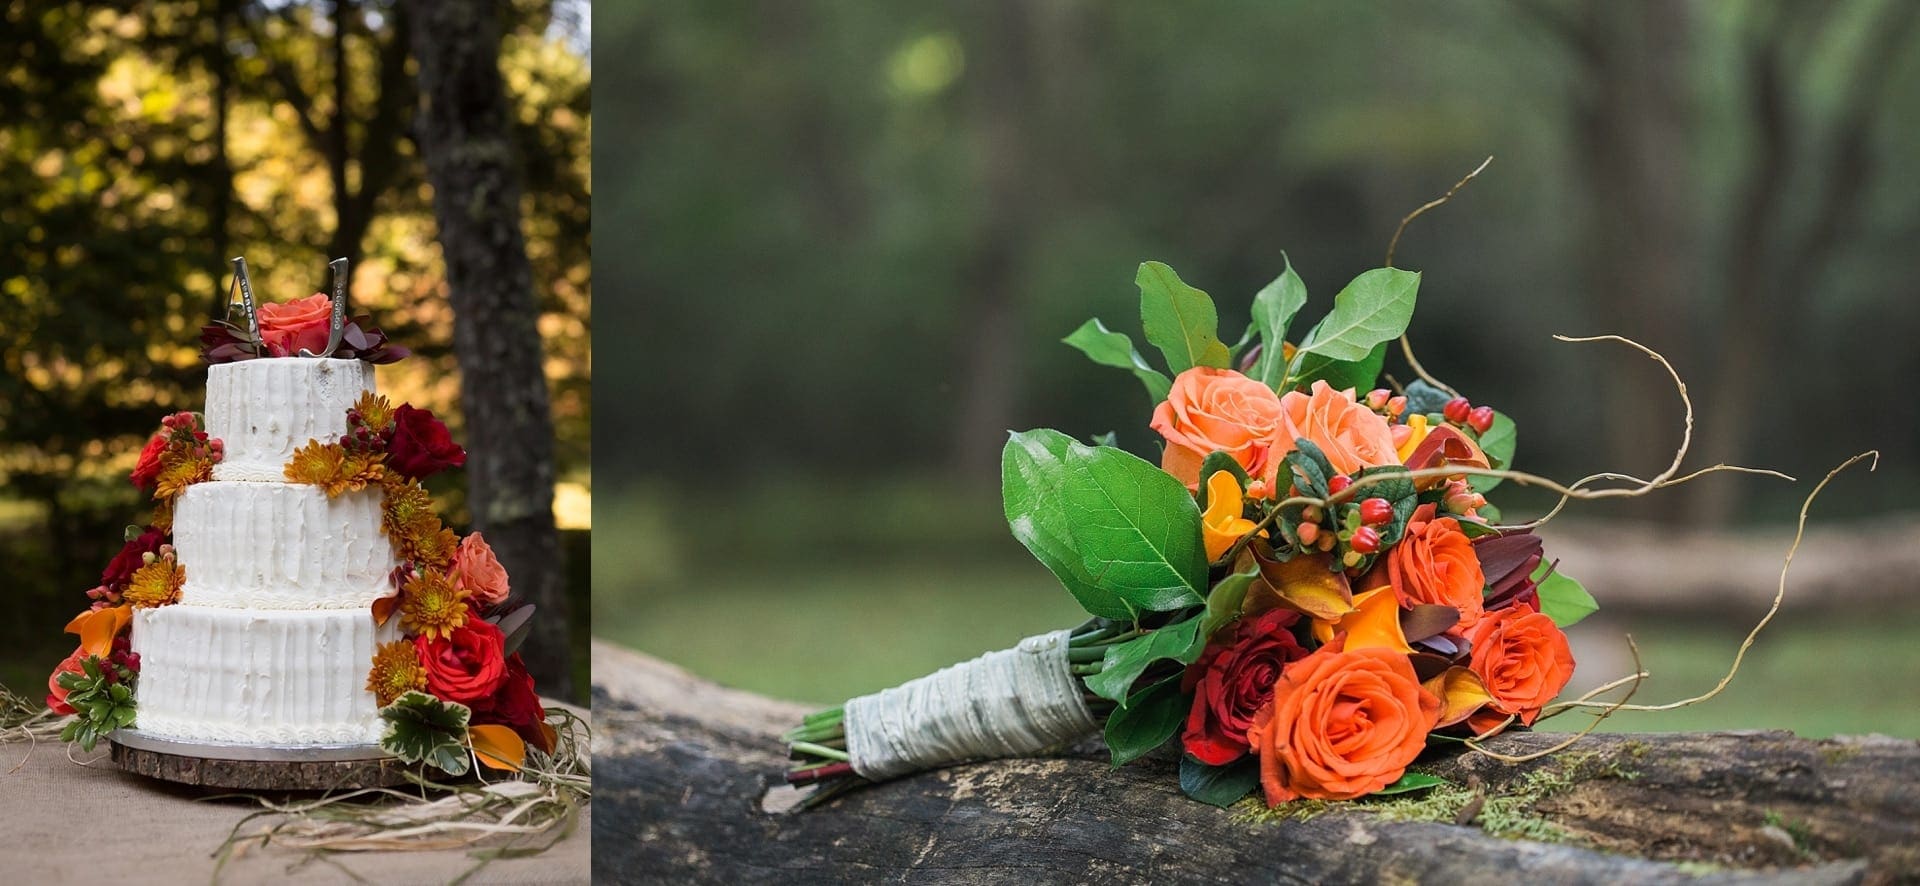 Fall flowers decorate a wedding cake along side a bouquet of autumn flowers and berries on a log with moss